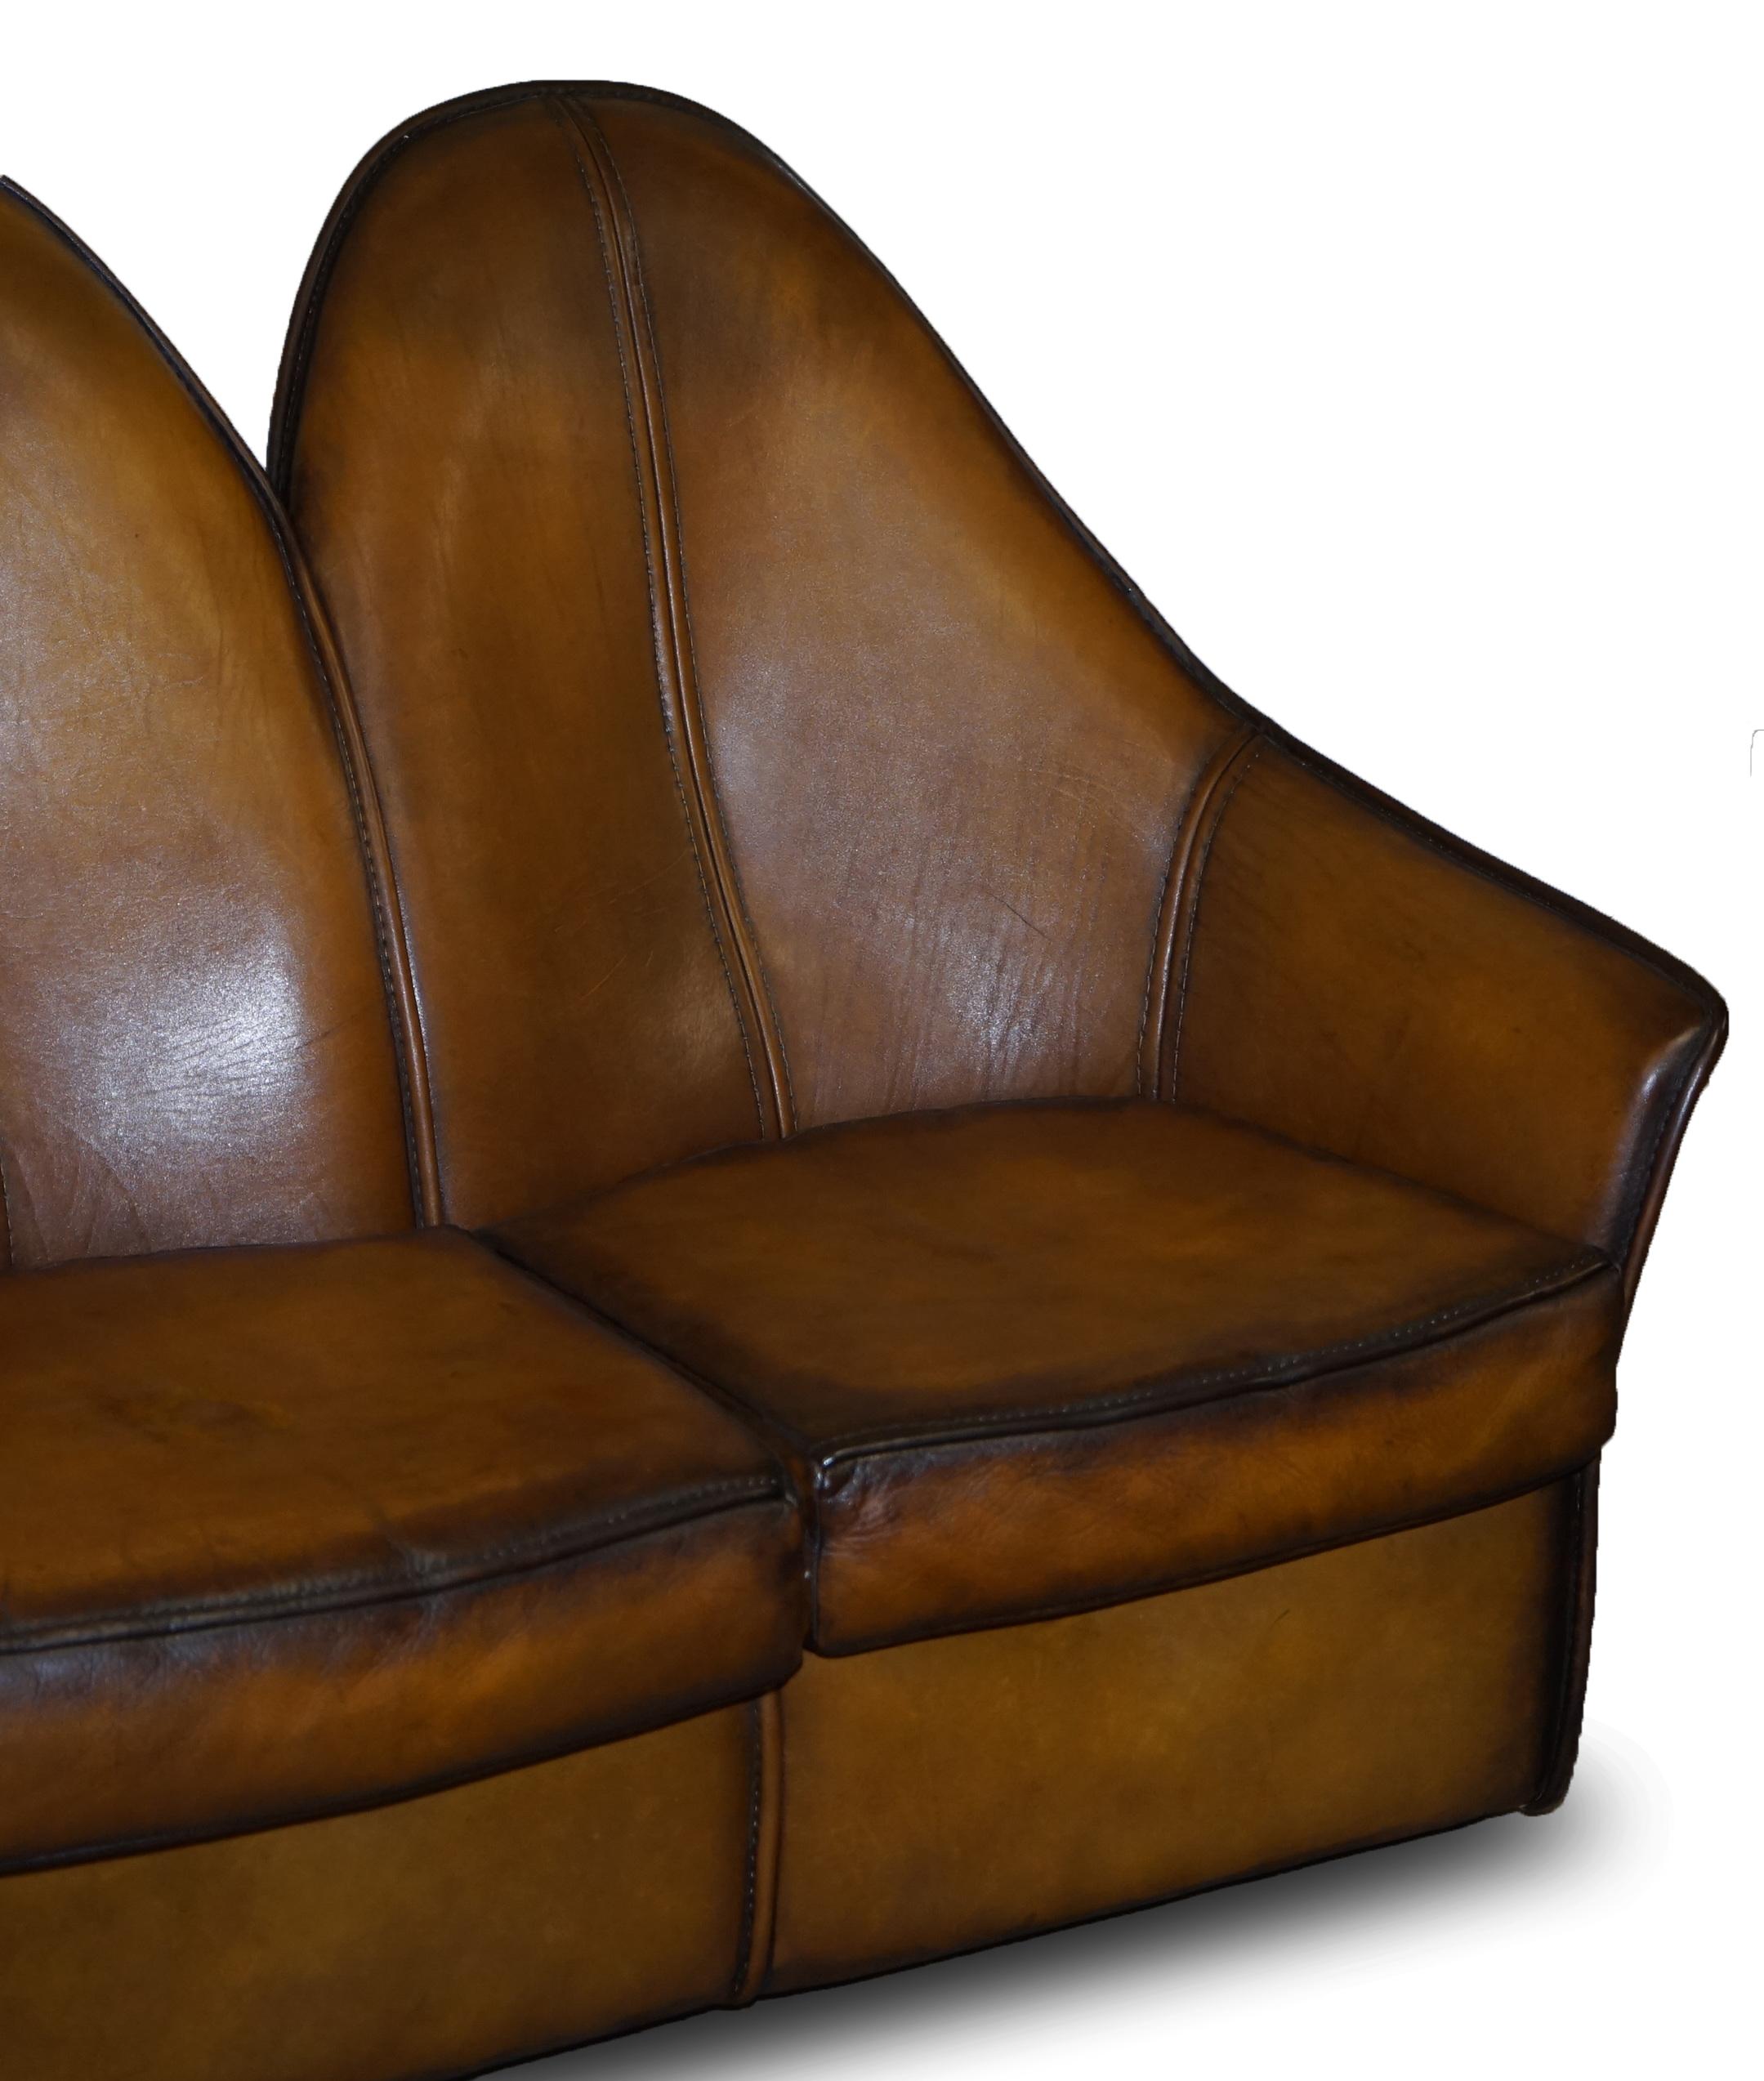 Post-Modern Sublime Fully Restored Art Modern Curved Back Brown Leather Sofa Part of Suite For Sale